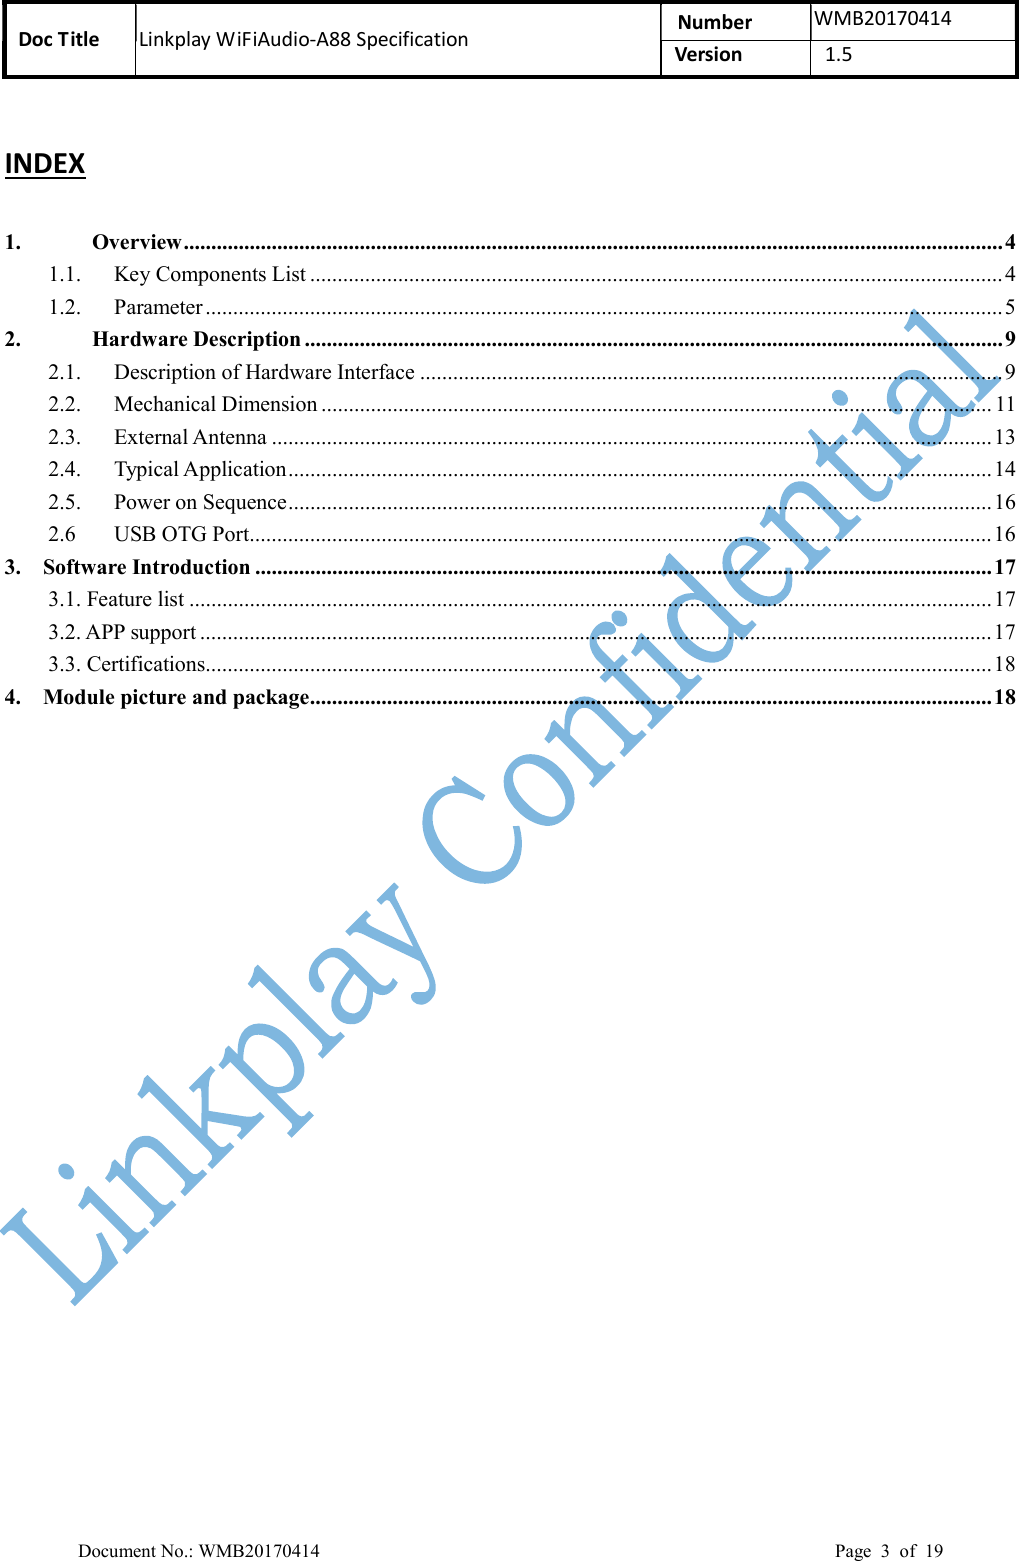 Doc Title  Linkplay WiFiAudio-A88 Specification  Number  WMB20170414 Version    1.5  Document No.: WMB20170414    Page  3  of  19 INDEX 1. Overview ..................................................................................................................................................... 4 1.1. Key Components List .............................................................................................................................. 4 1.2. Parameter ................................................................................................................................................. 5 2. Hardware Description ............................................................................................................................... 9 2.1. Description of Hardware Interface .......................................................................................................... 9 2.2. Mechanical Dimension .......................................................................................................................... 11 2.3. External Antenna ................................................................................................................................... 13 2.4. Typical Application ................................................................................................................................ 14 2.5. Power on Sequence ................................................................................................................................ 16 2.6 USB OTG Port ....................................................................................................................................... 16 3.    Software Introduction ...................................................................................................................................... 17 3.1. Feature list .................................................................................................................................................. 17 3.2. APP support ................................................................................................................................................ 17 3.3. Certifications............................................................................................................................................... 18 4.    Module picture and package ............................................................................................................................ 18  